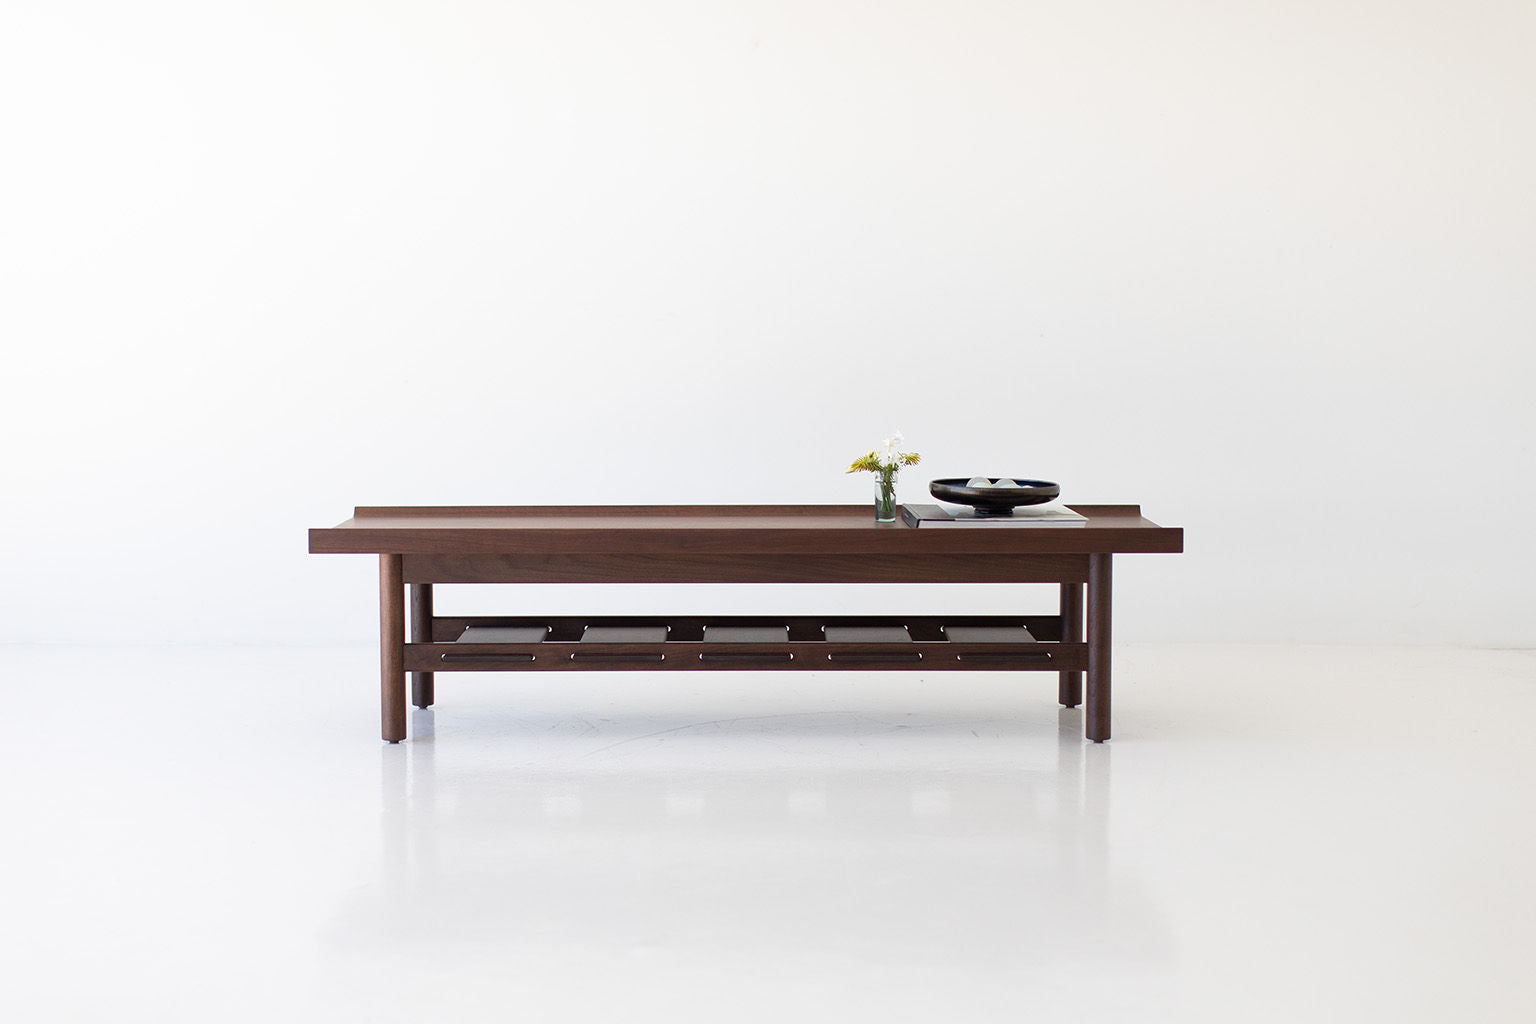 Lawrence Peabody Modern Coffee Table 2009 Craft Associates Furniture, Image 01